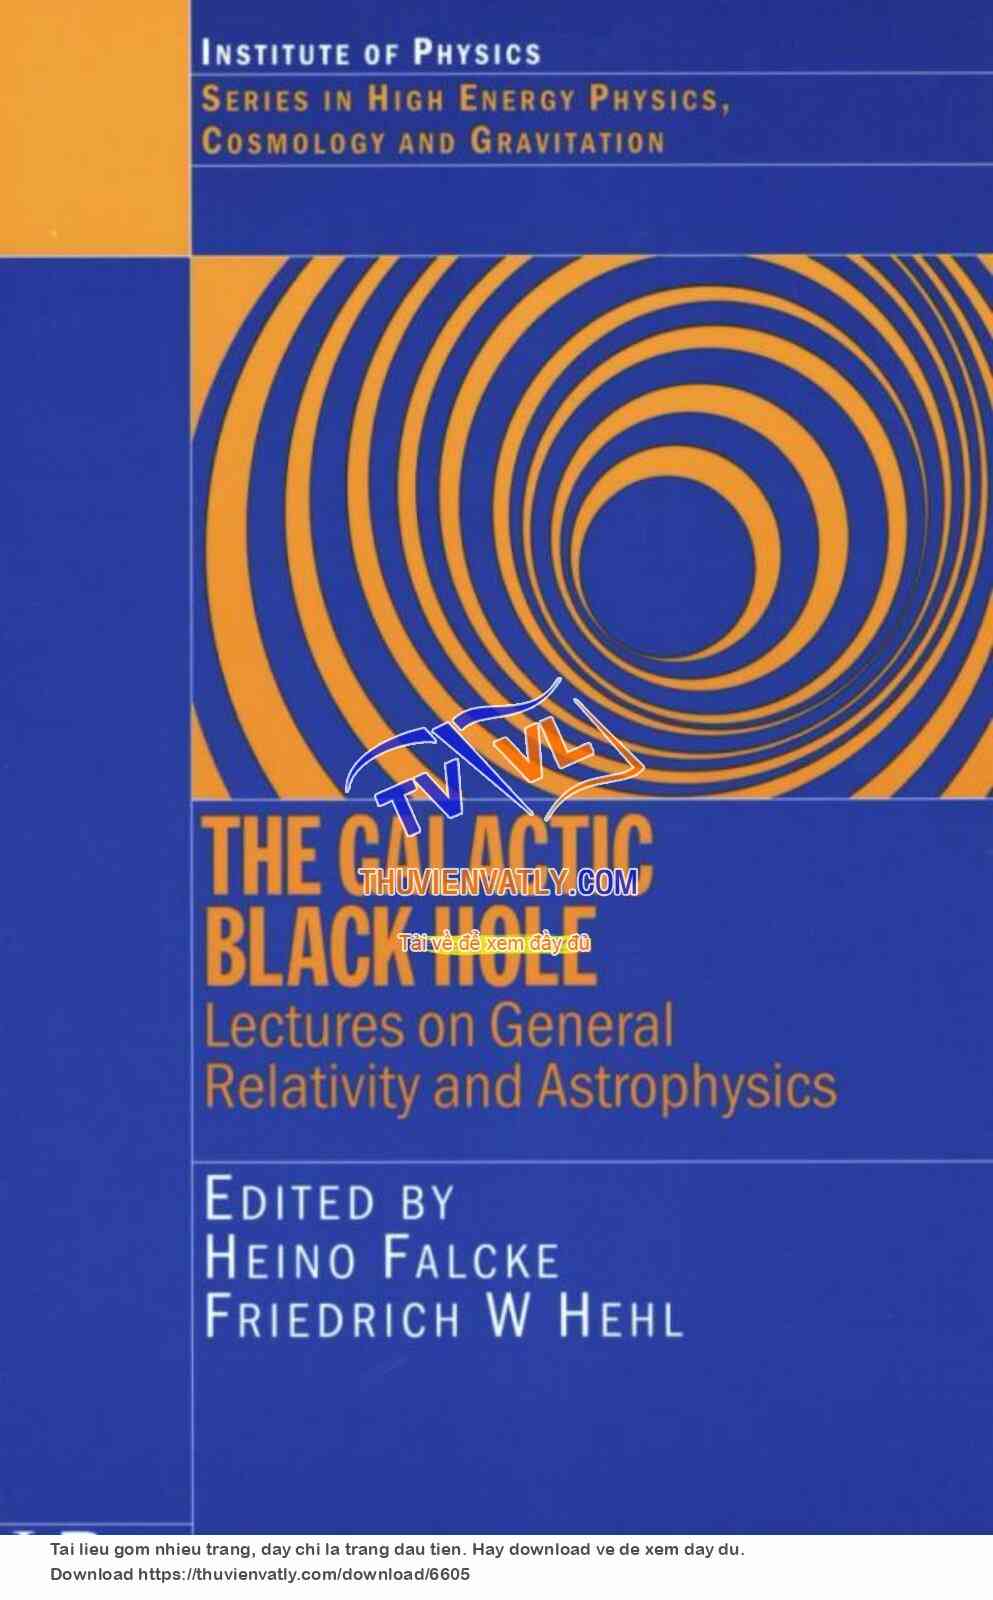 THE GALACTIC BLACK HOLE - Lectures on General Relativity and Astrophysics